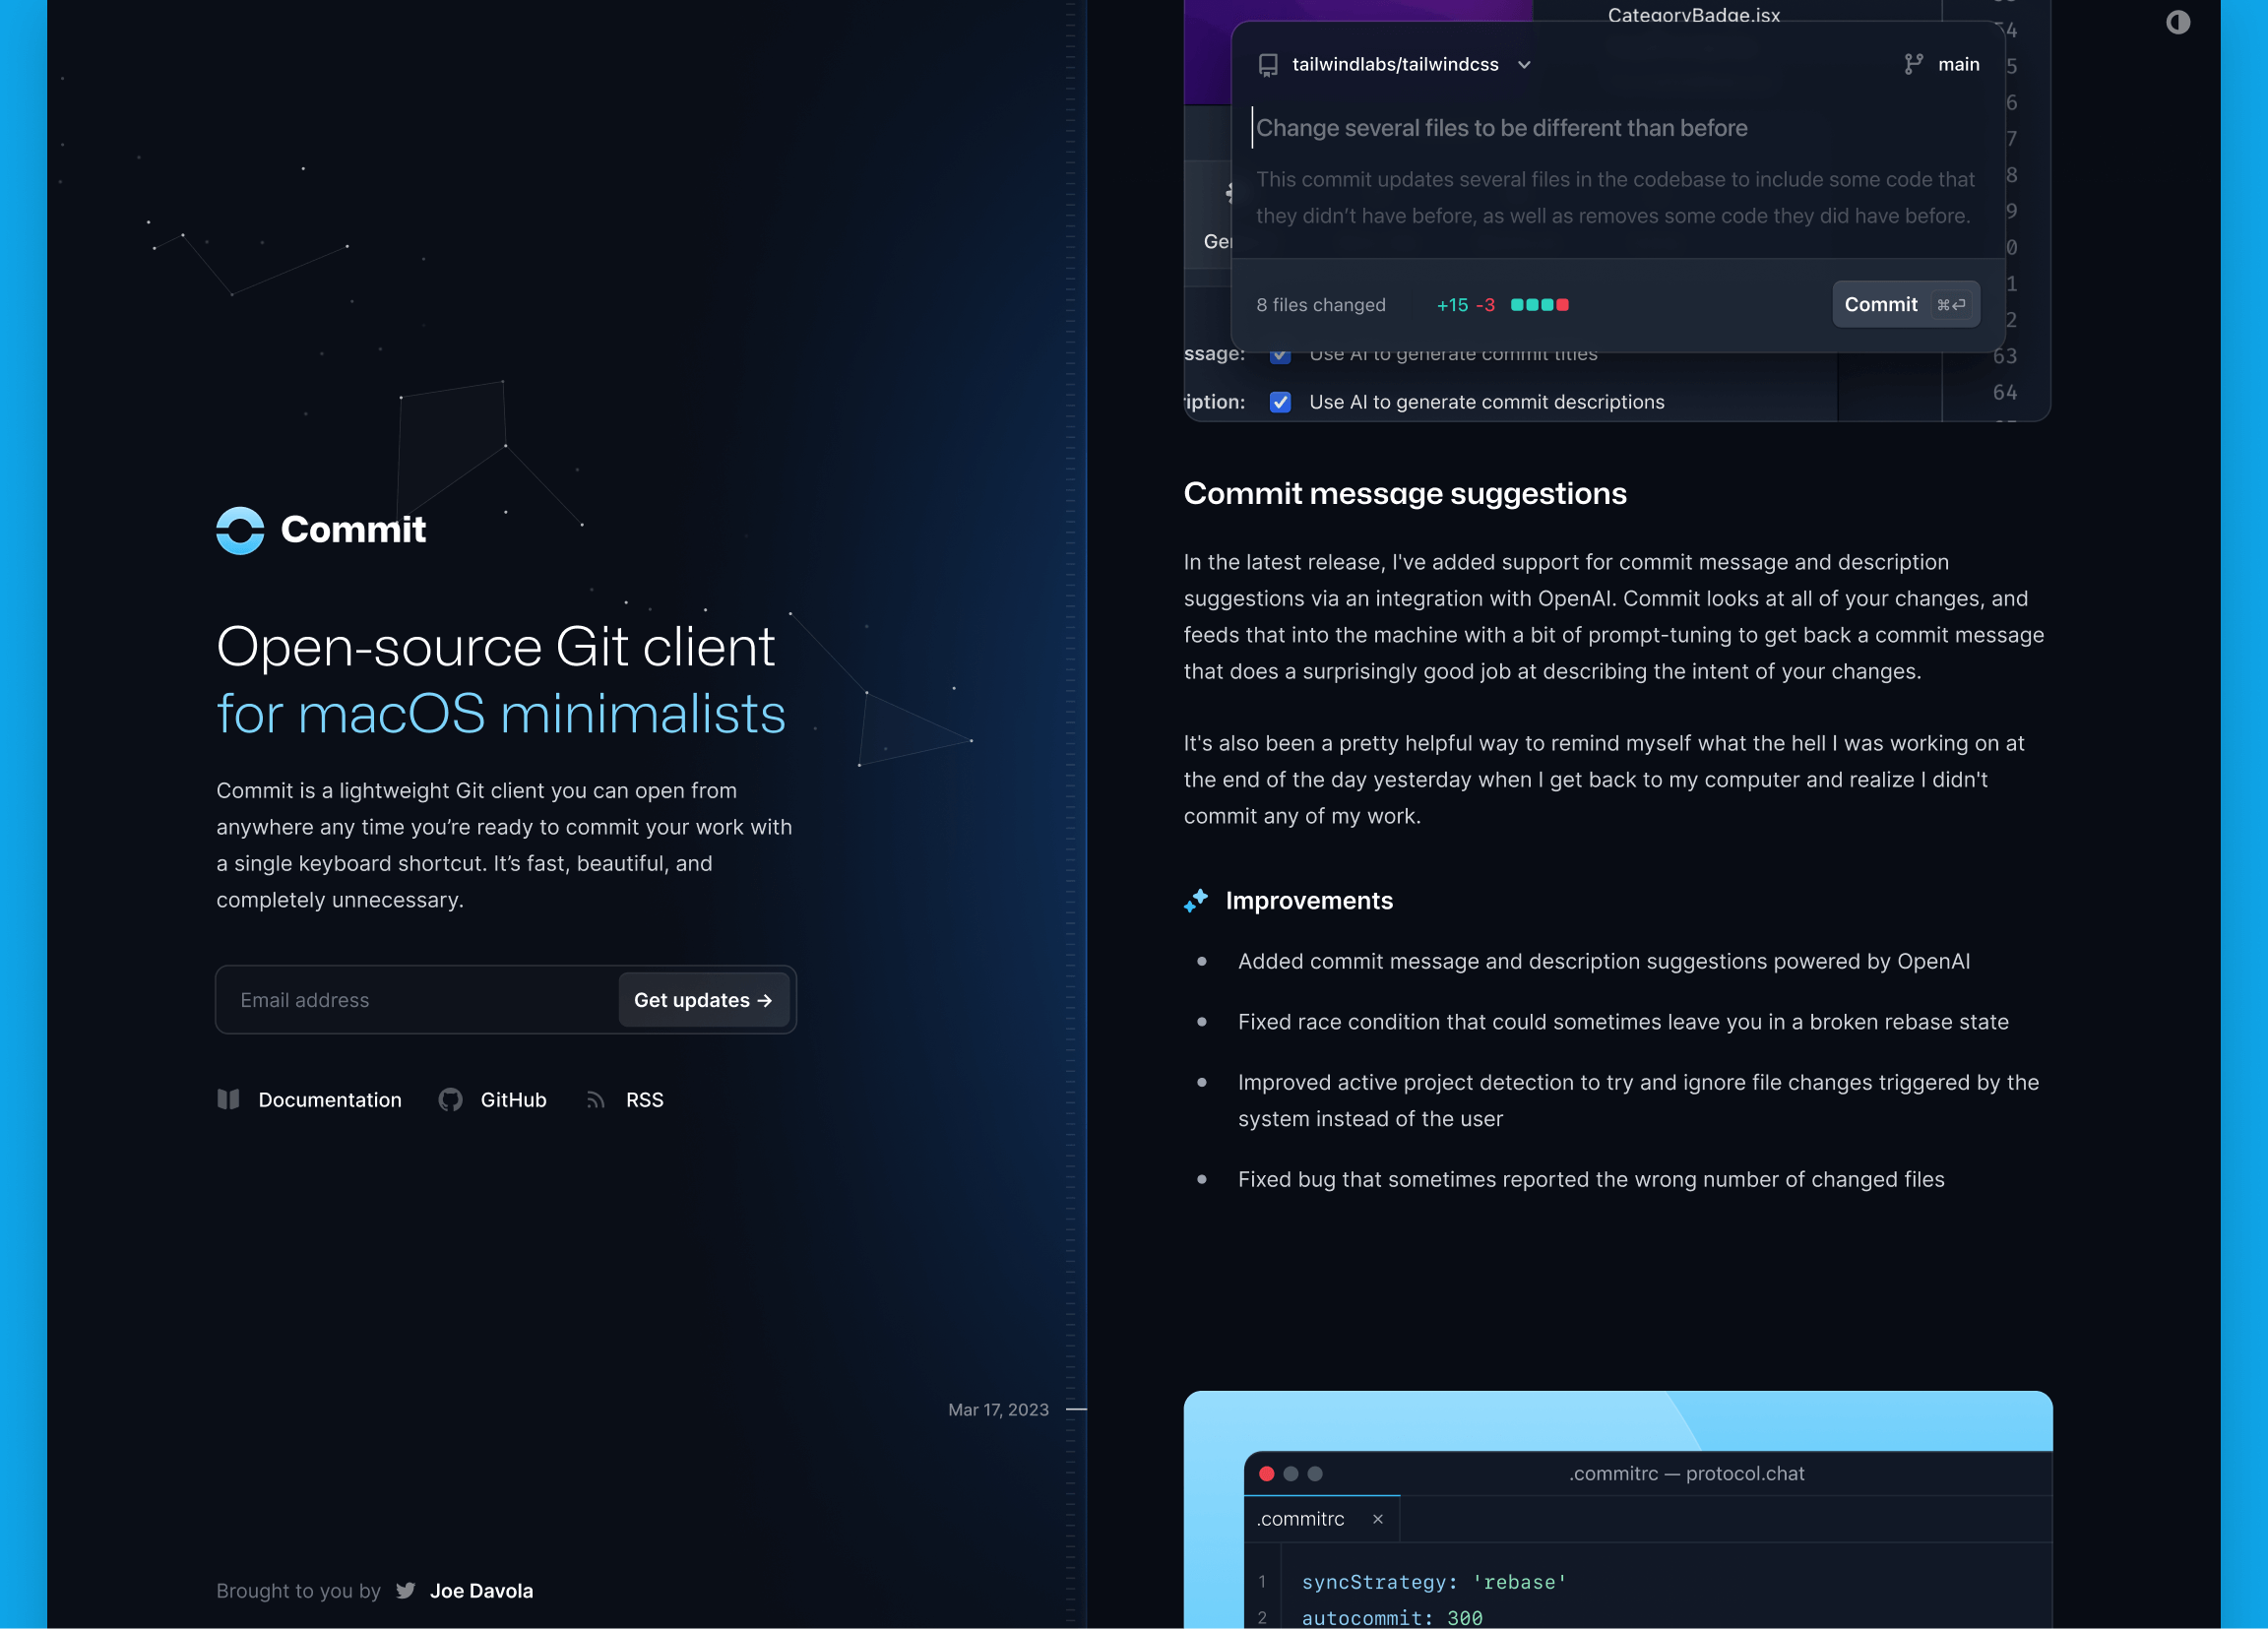 The Commit template in dark mode, partially scrolled down to reveal a second post